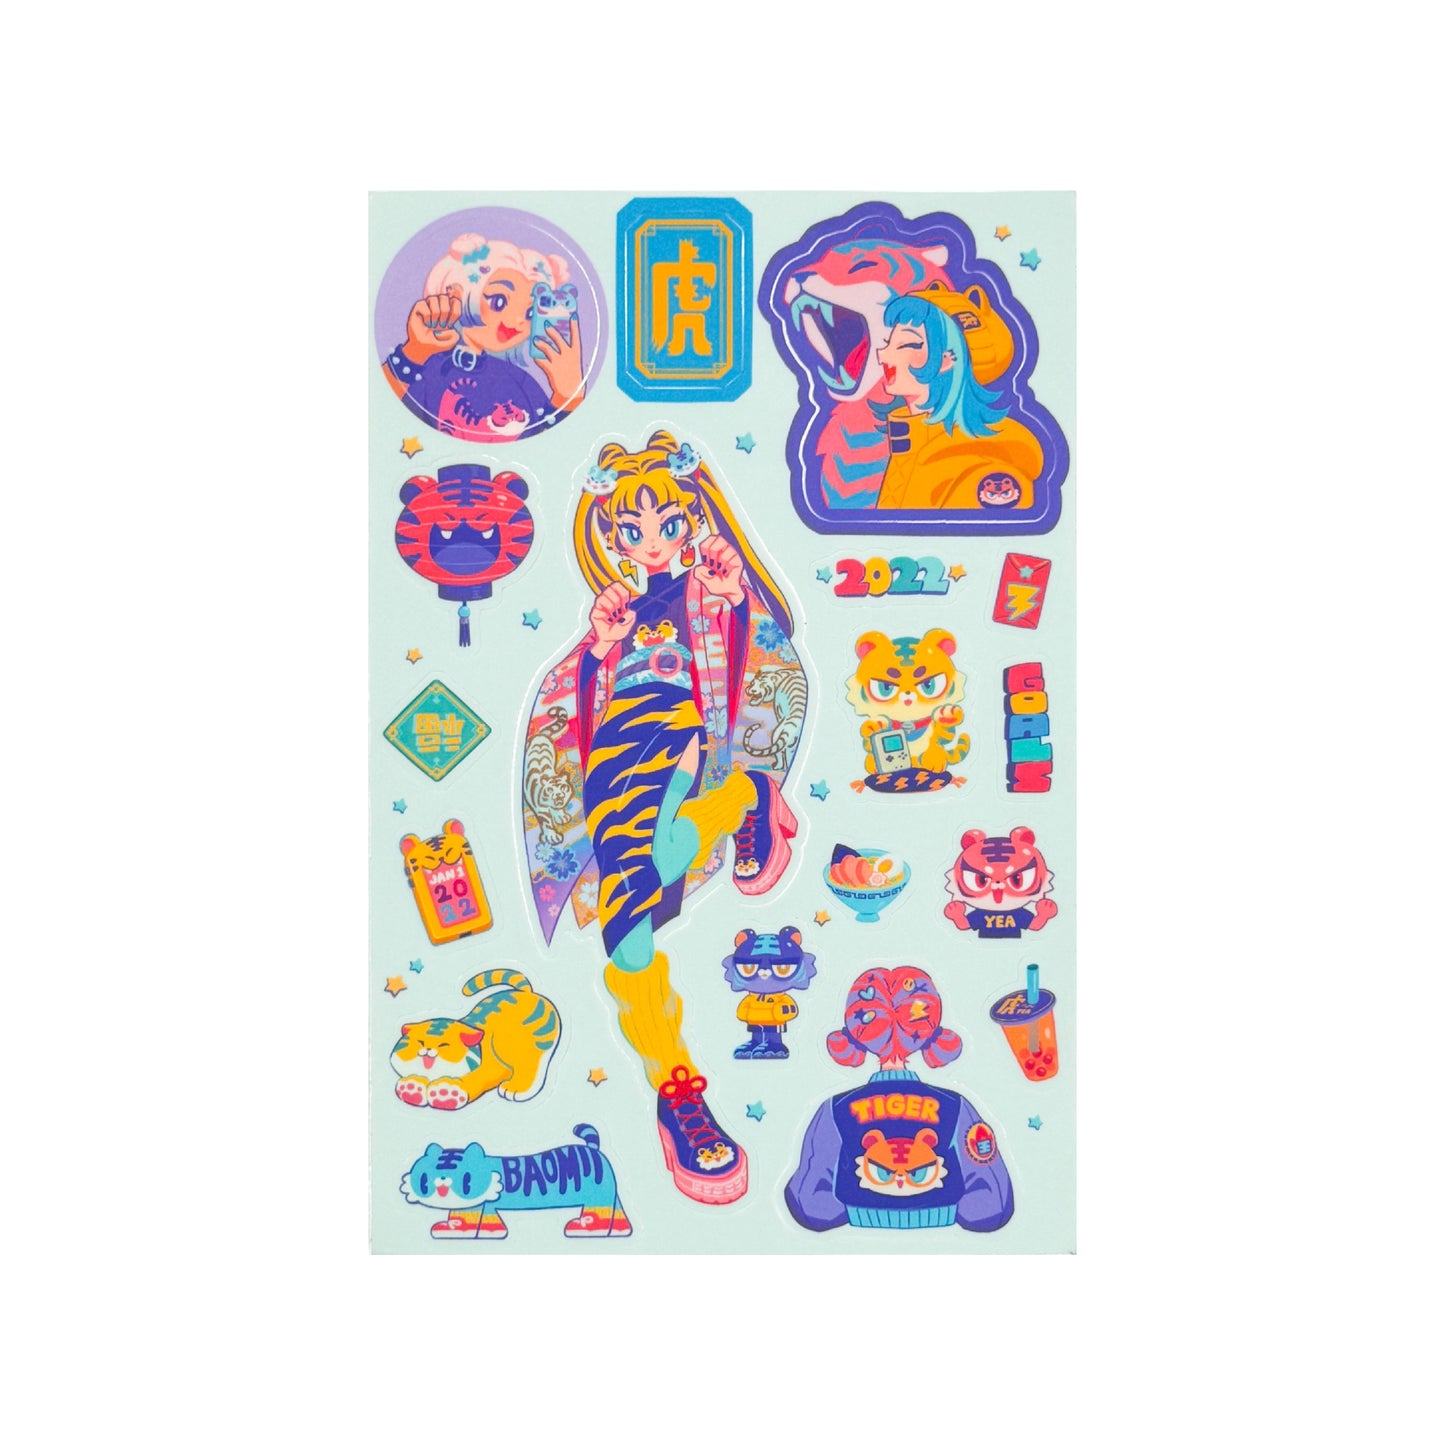 Year of the Tiger Sticker Sheet